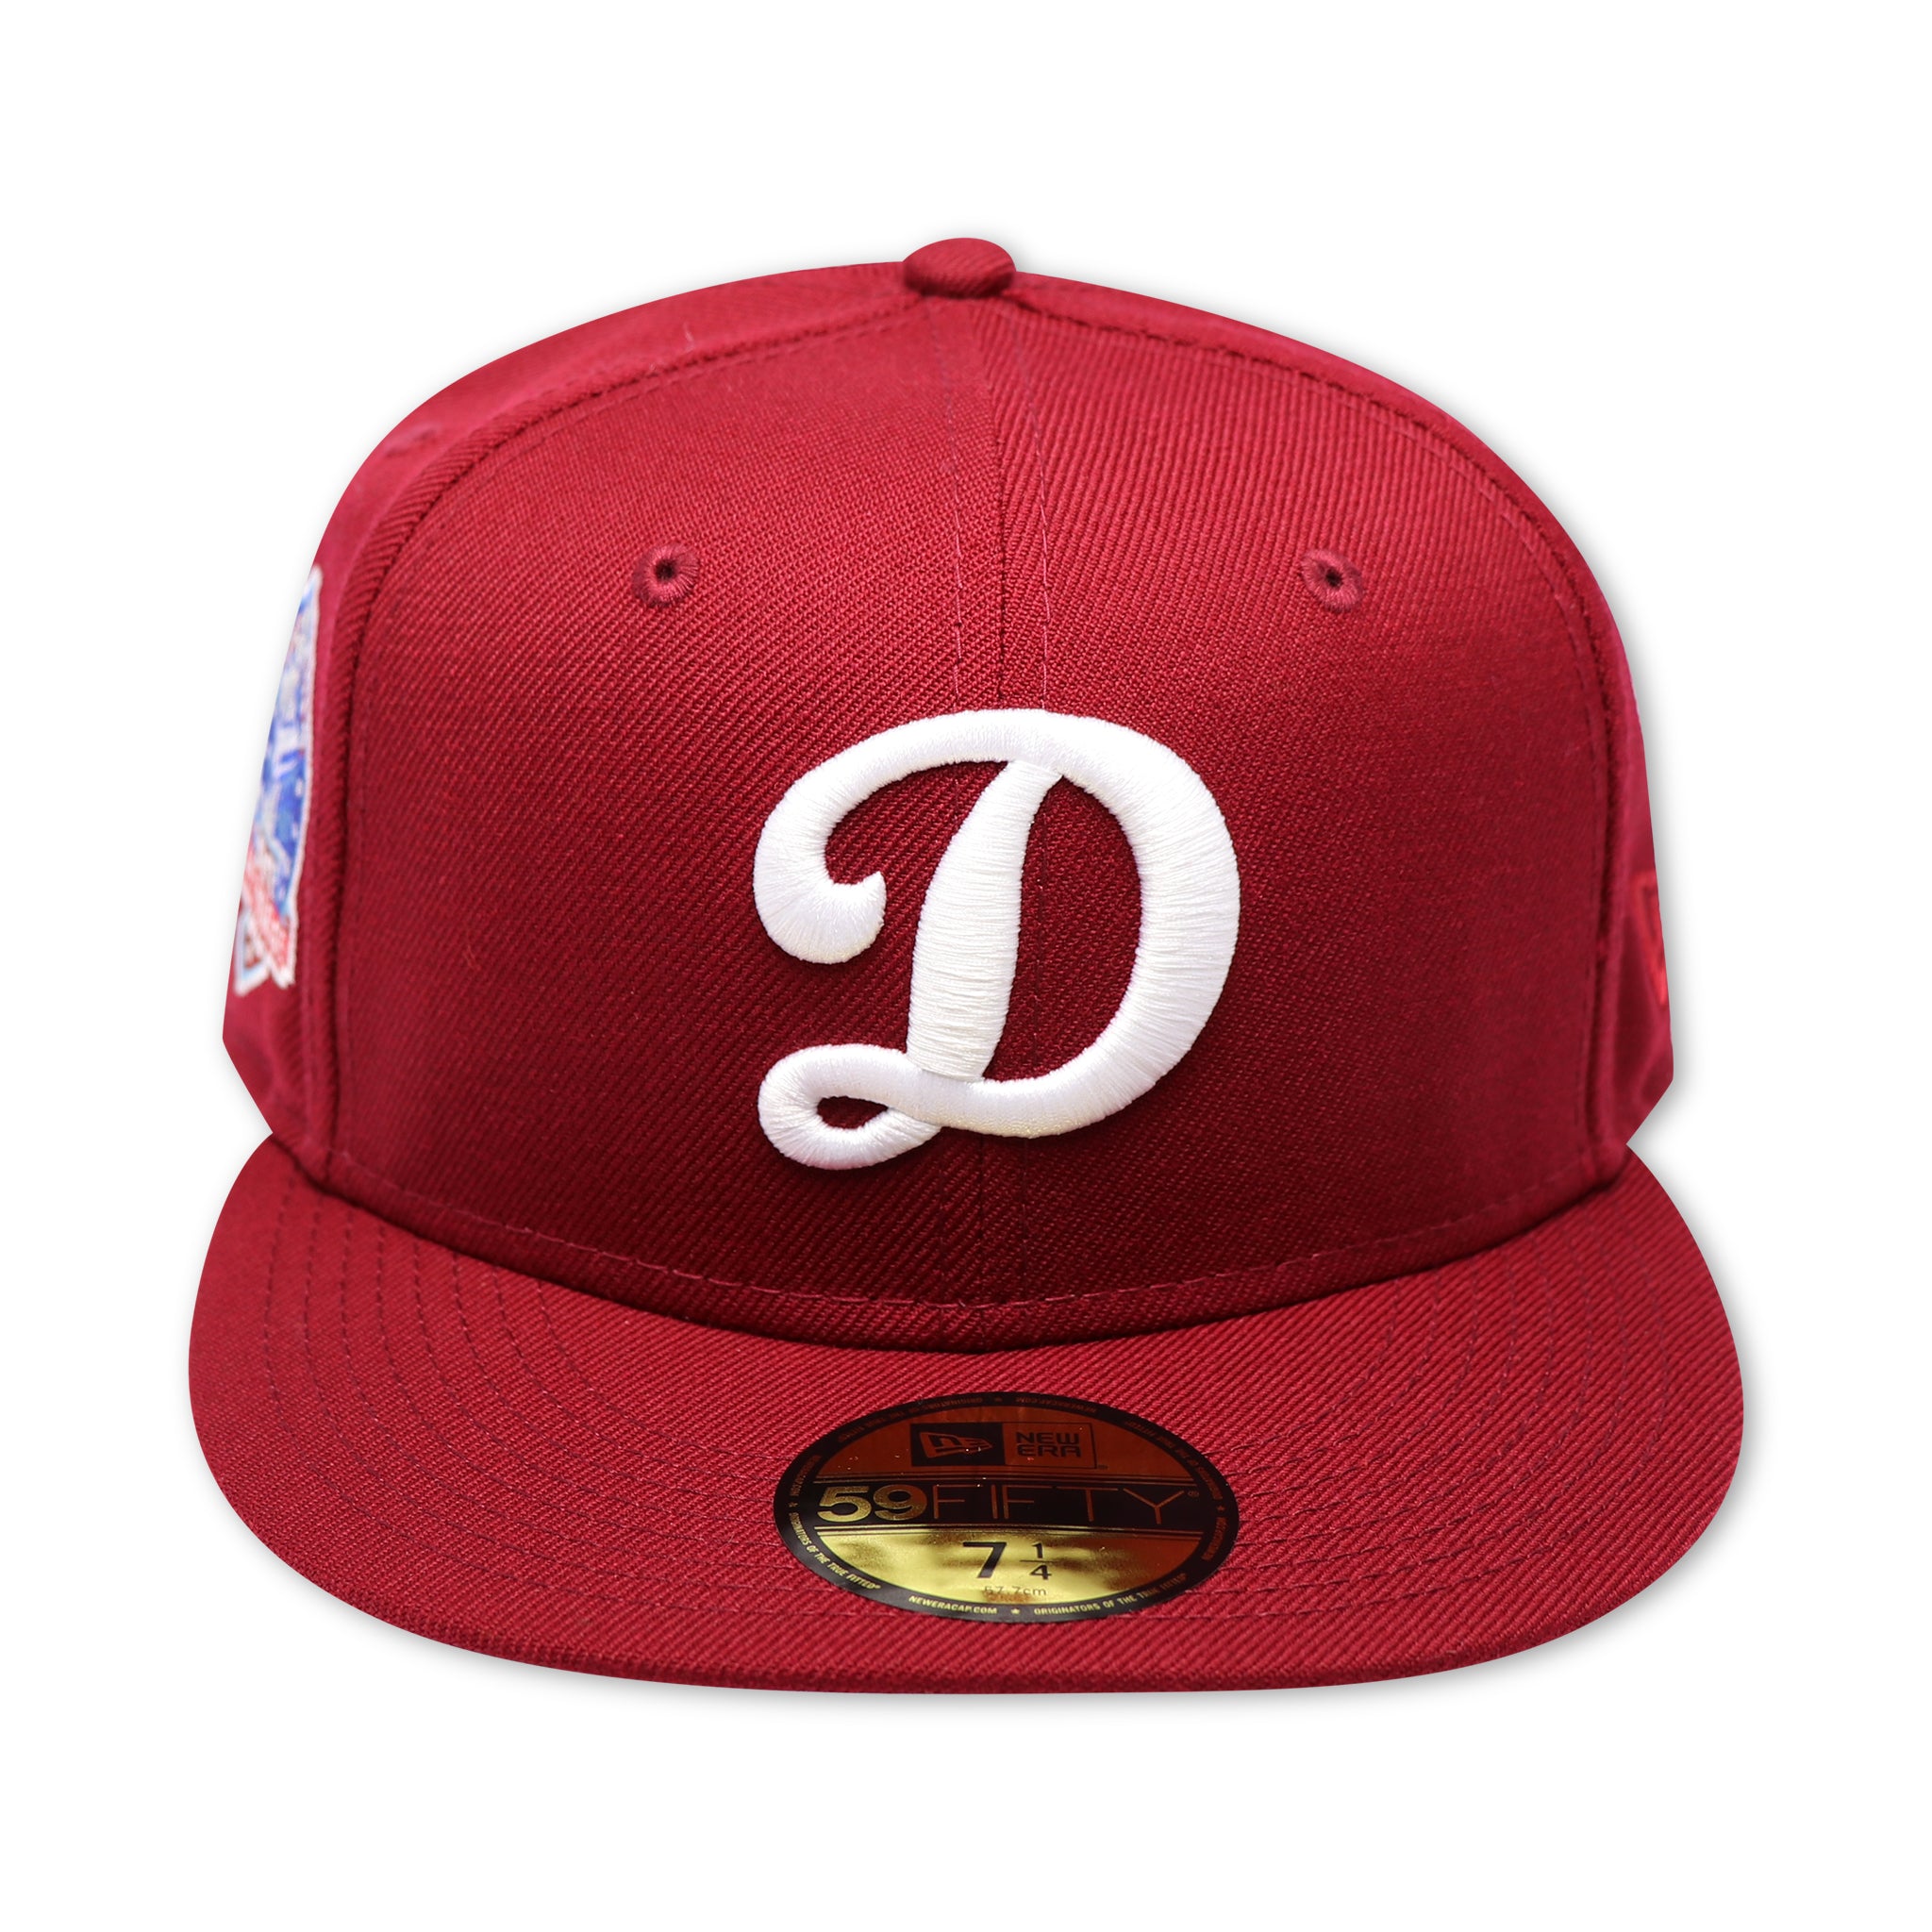 LOS ANGELES DODGERS "DR PEPPER" (60TH ANNIVERSARY) NEW ERA 59FIFTY FITTED (SKY BLUE UNDER VISOR) (S)